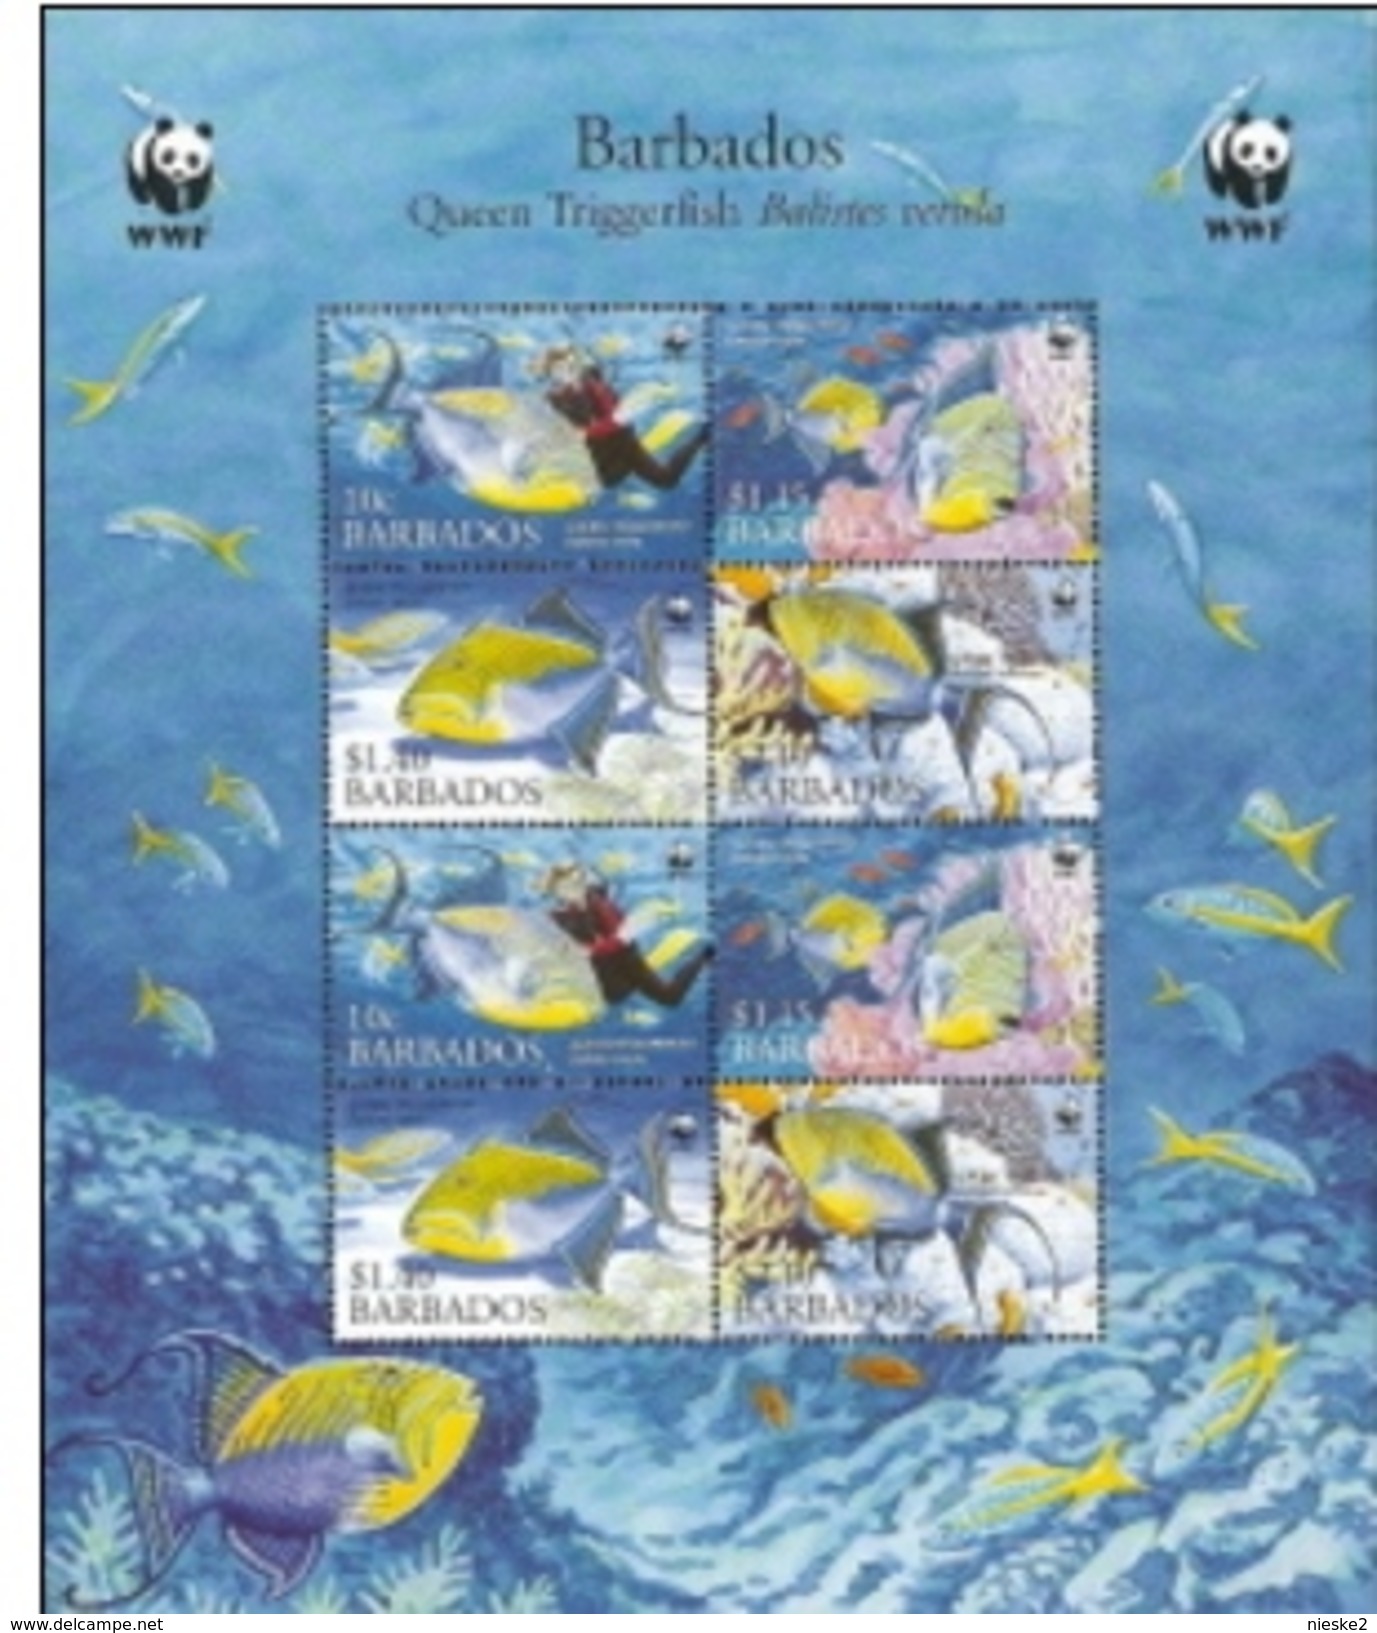 Barbados, Scott 2014 # 1105a, Issued 2006, S/S Of 8, MNH, Cat $ 13.00, WWF, Fish LOT C64 - Barbades (1966-...)